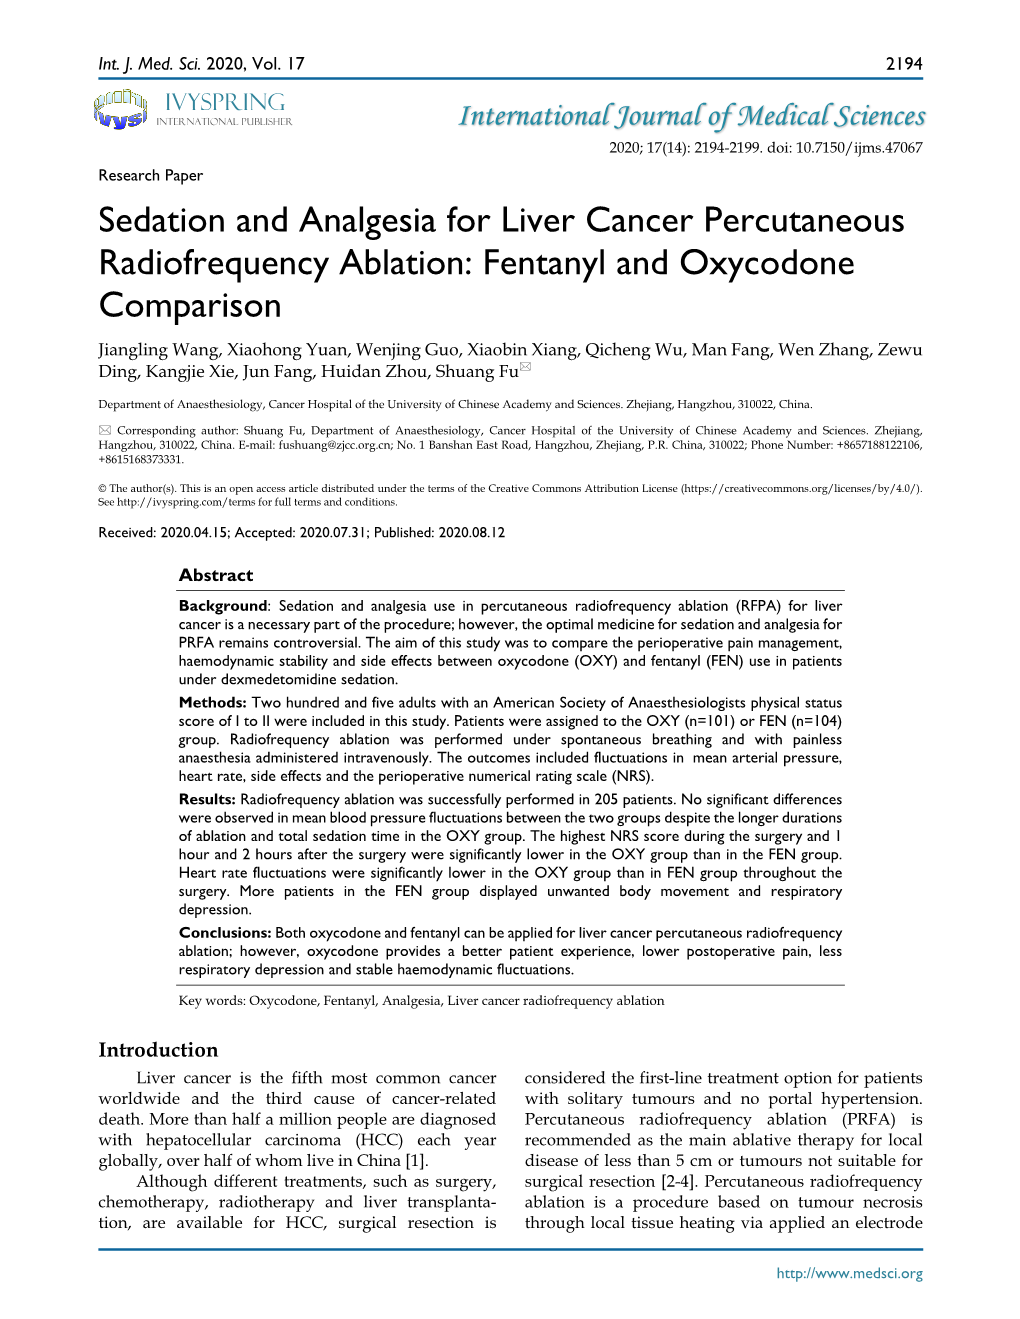 Sedation and Analgesia for Liver Cancer Percutaneous